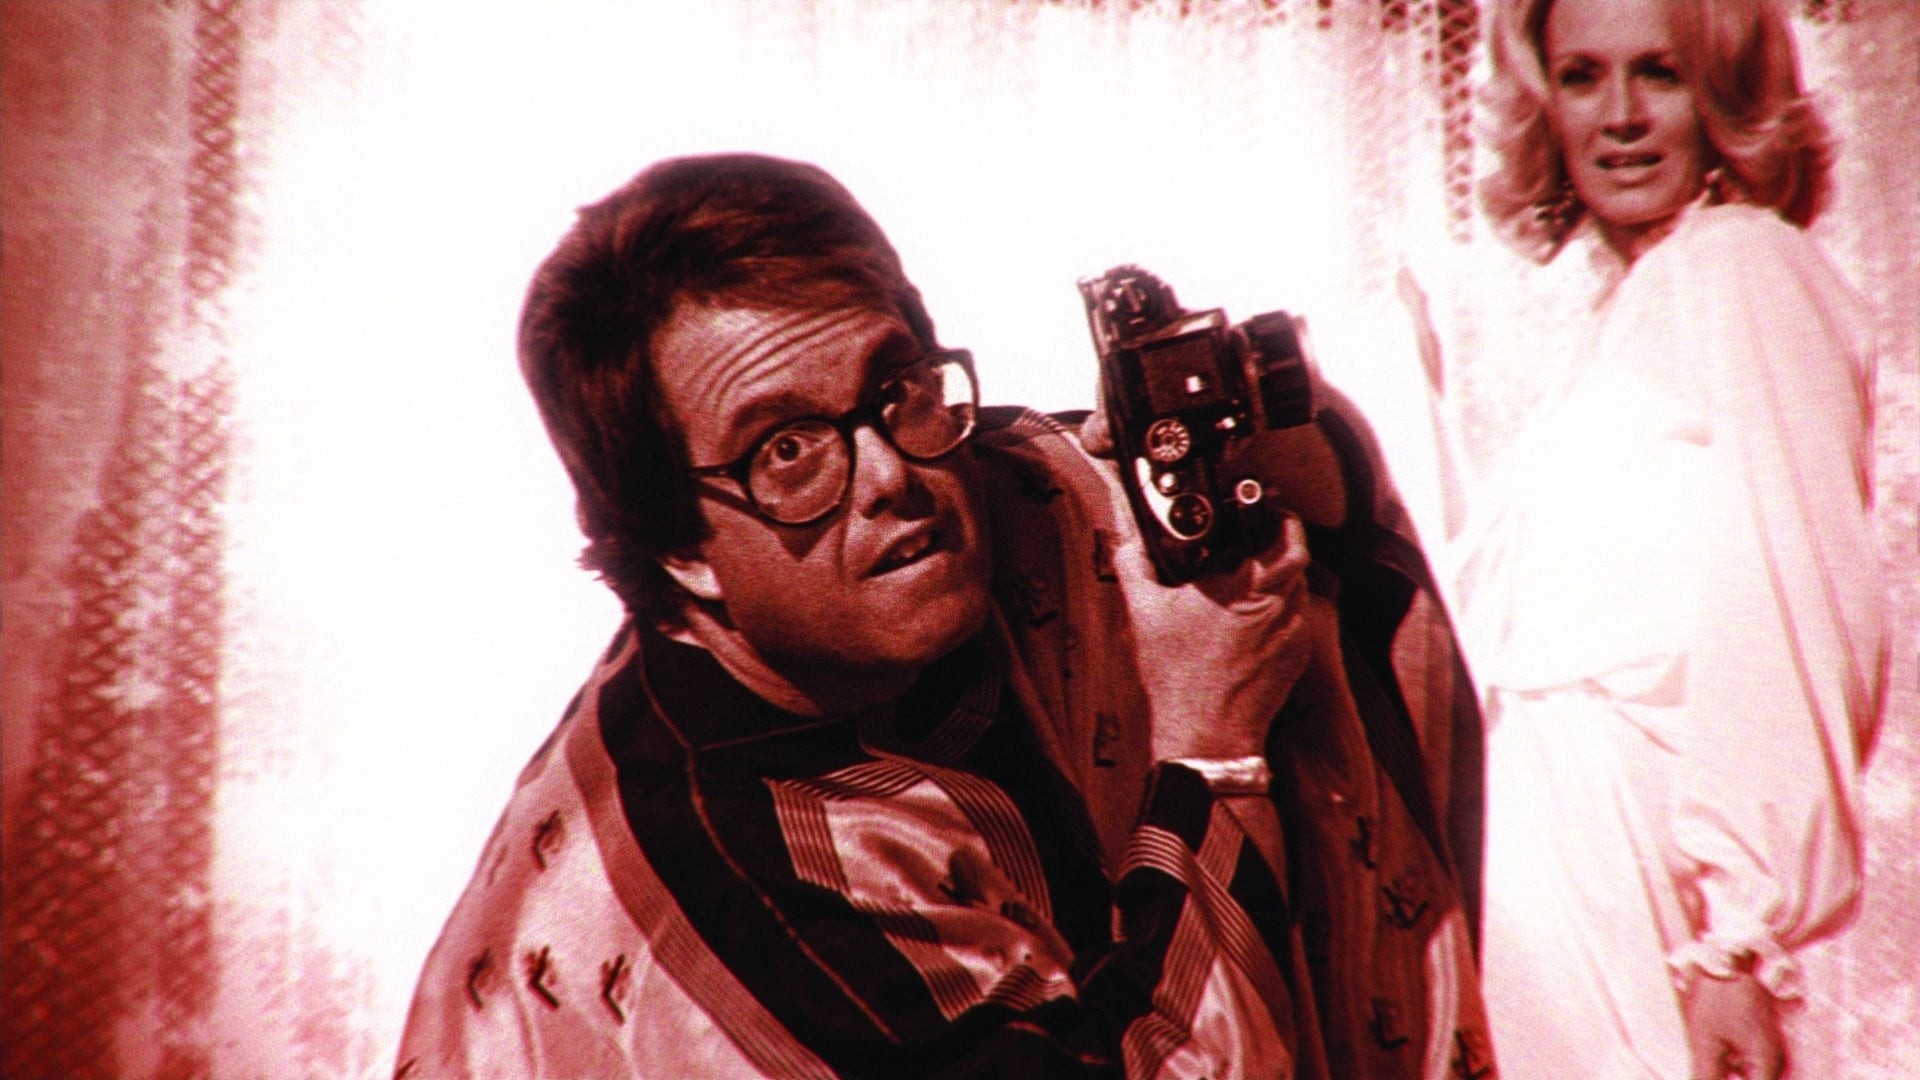 The Fabulous Allan Carr background